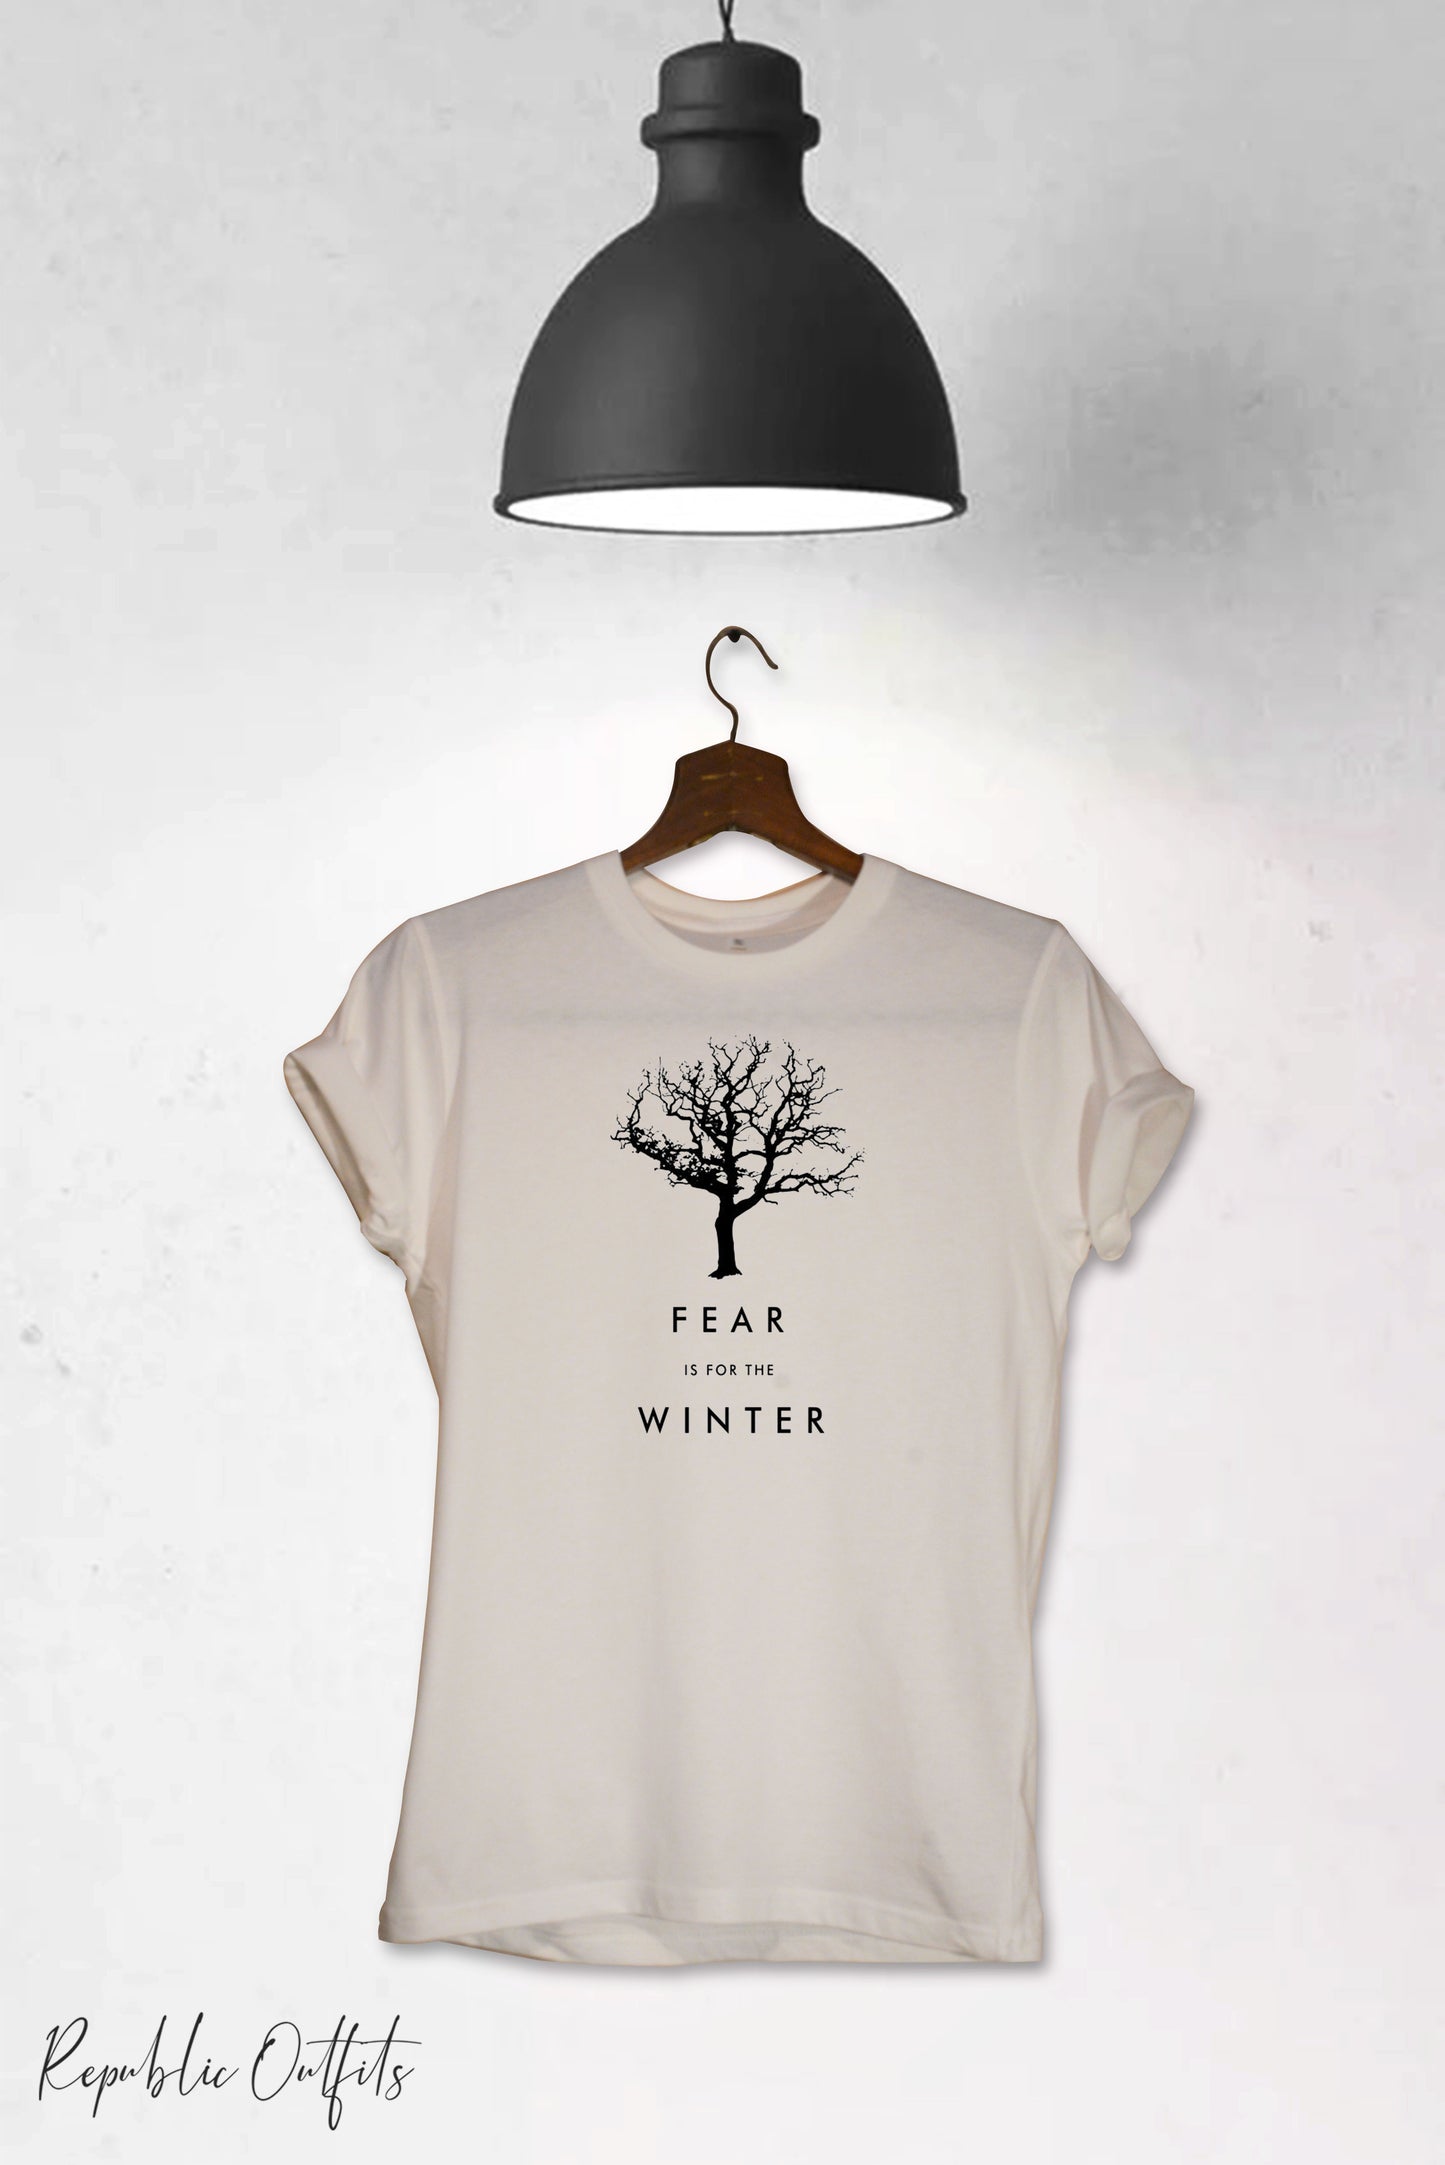 Fear is for the winter T-shirt